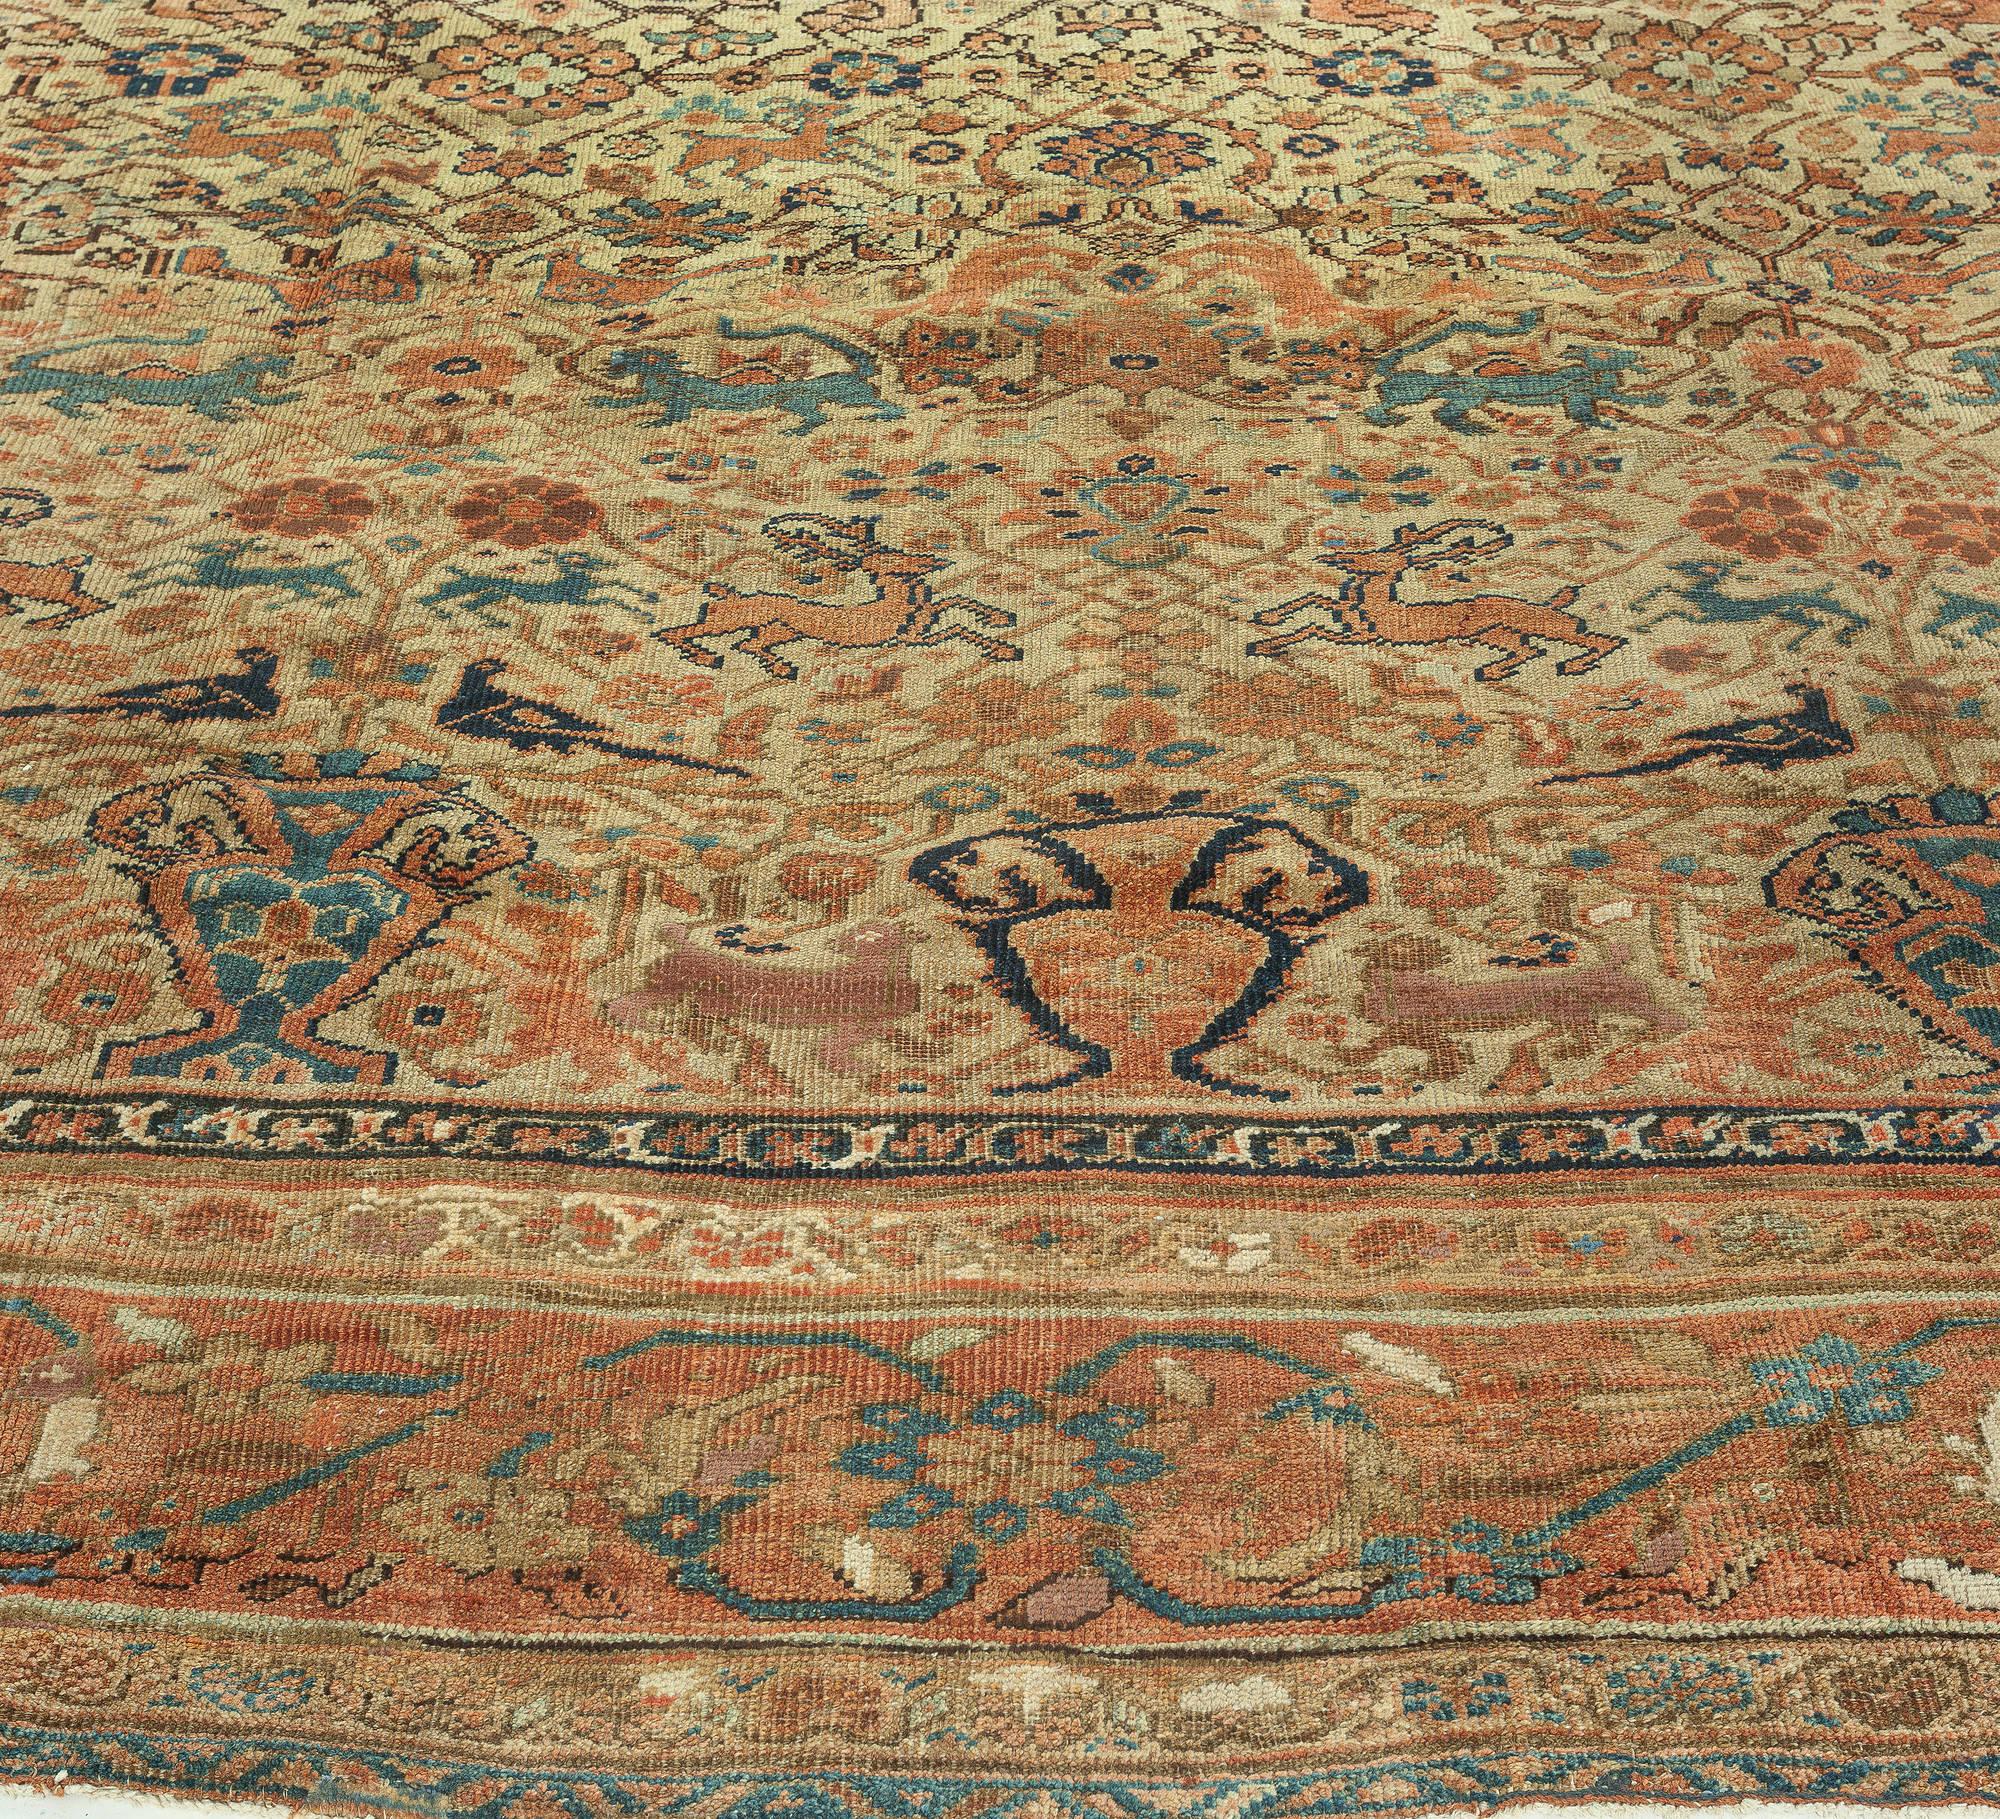 Late 19th Century Persian Sultanabad Area Rug In Good Condition For Sale In New York, NY